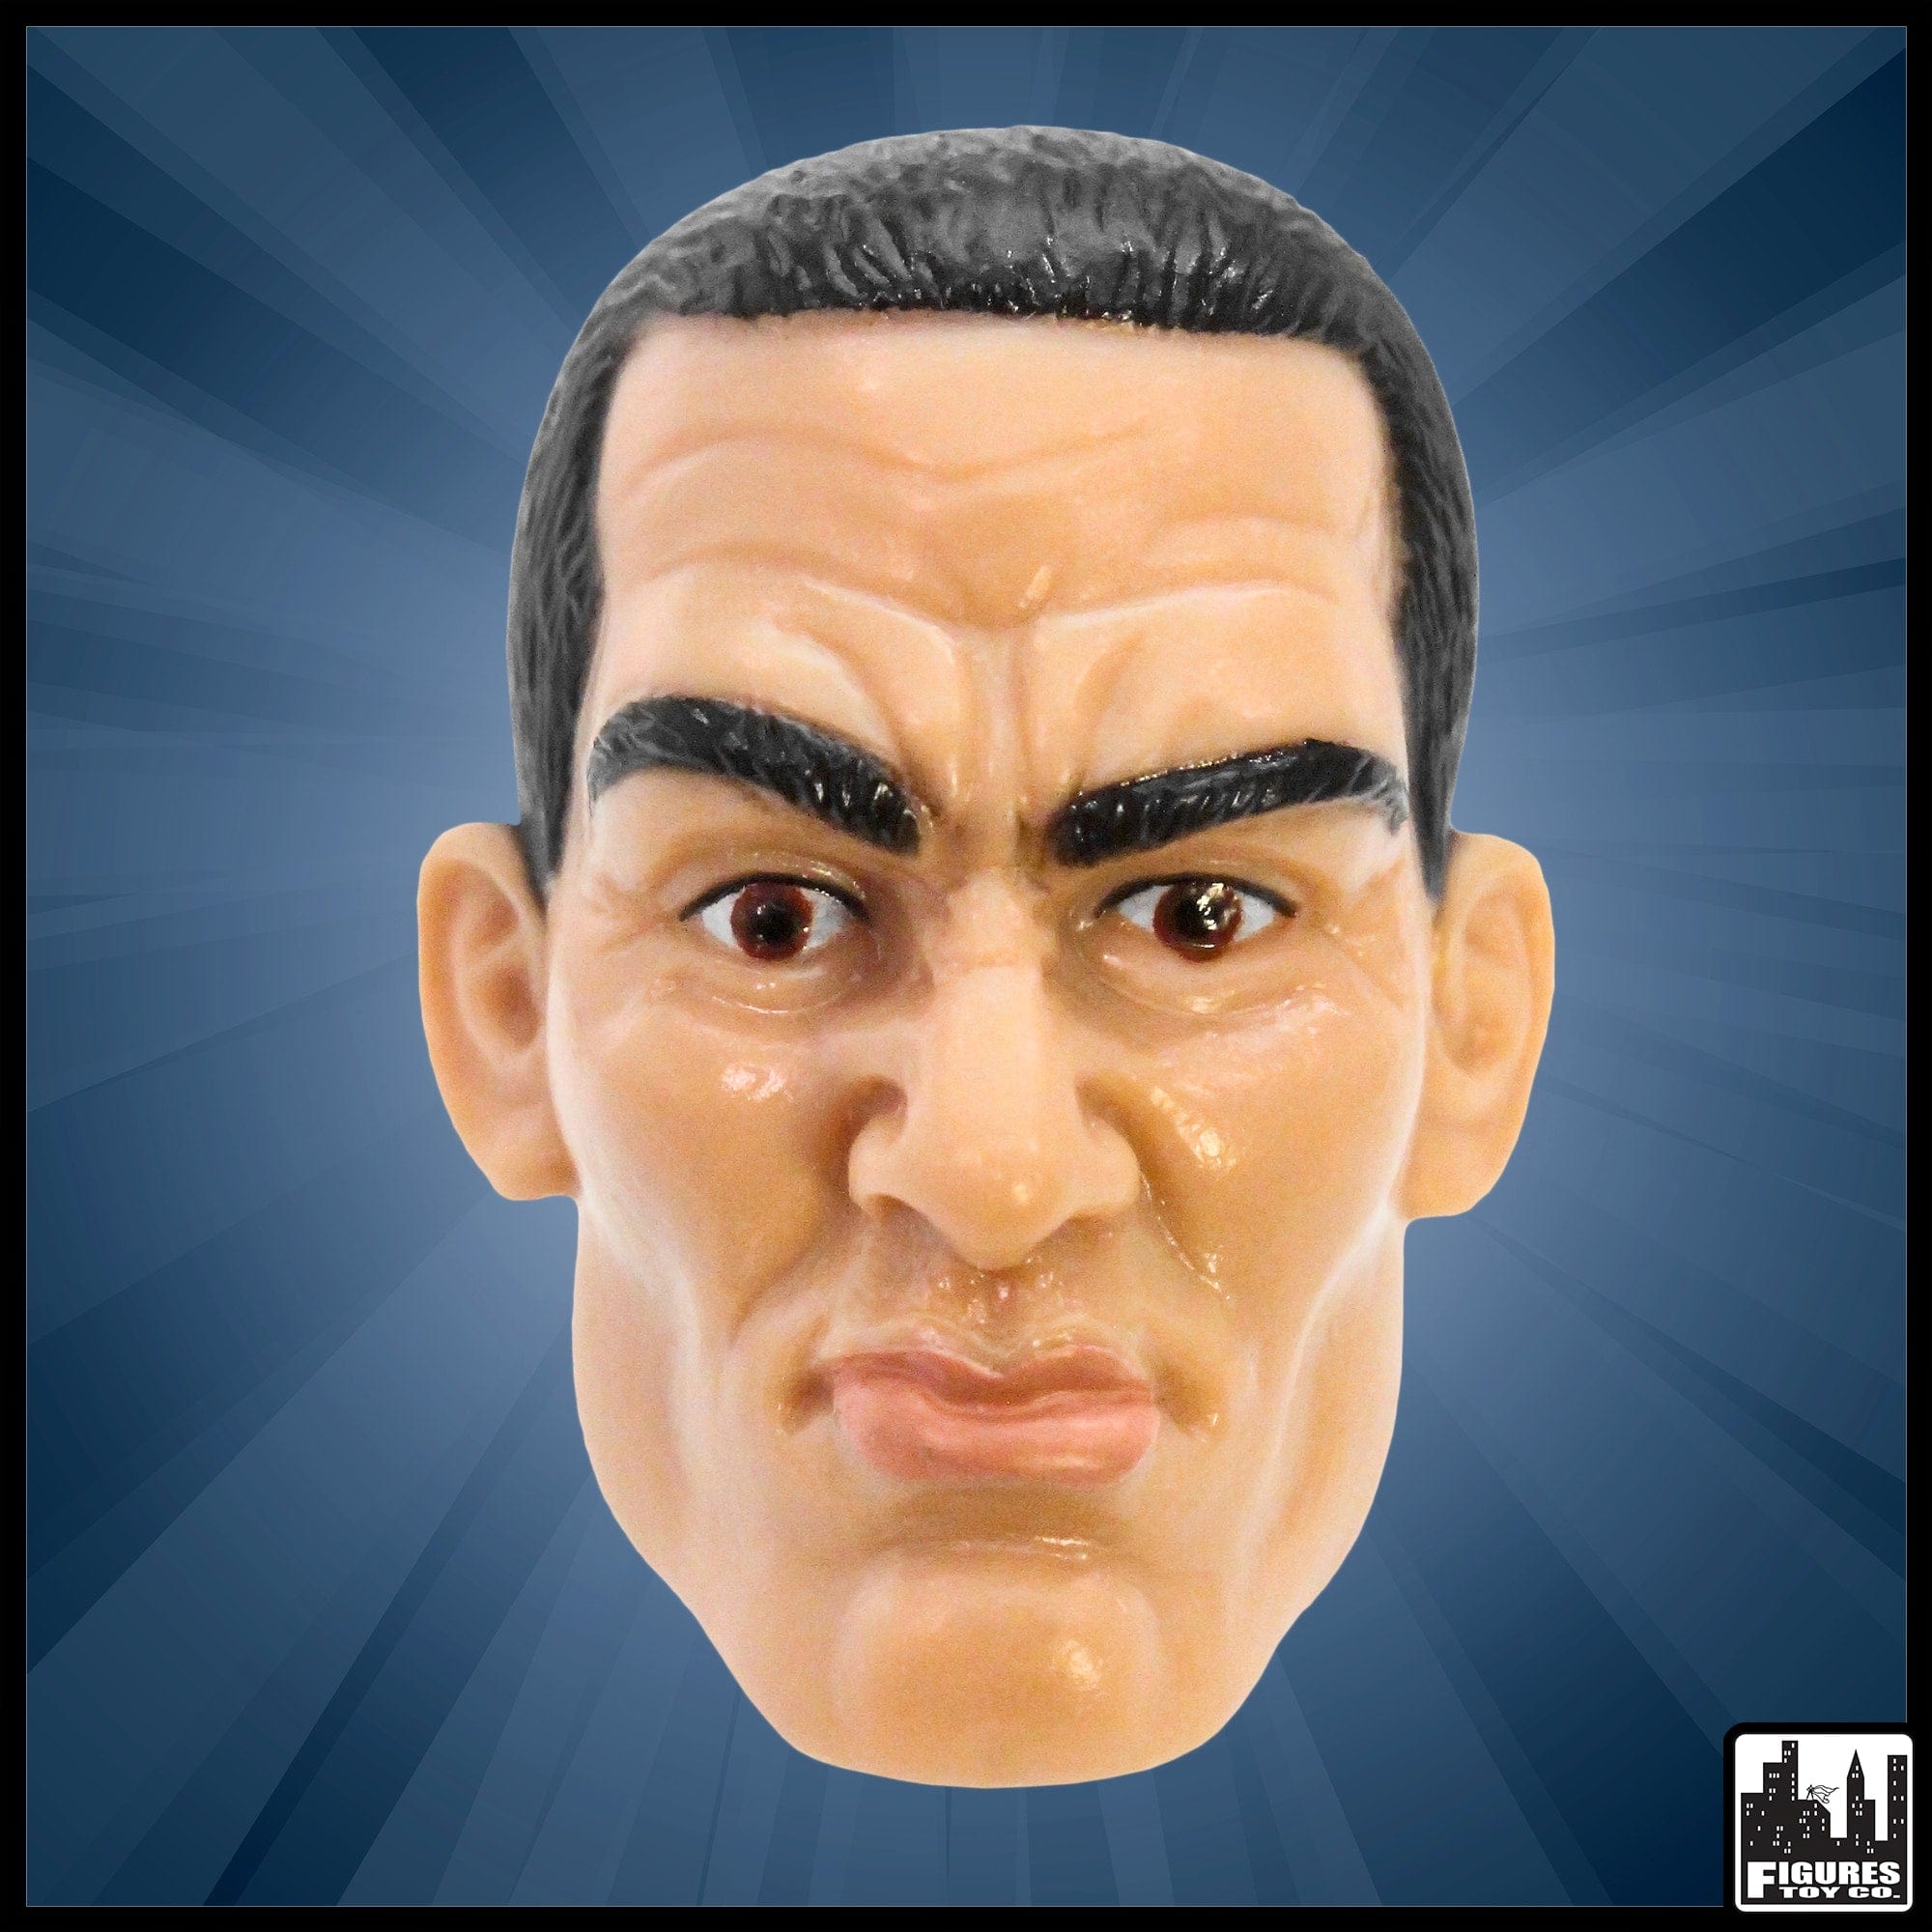 White Male Interchangeable Wrestling Action Figure Head With Black Hair